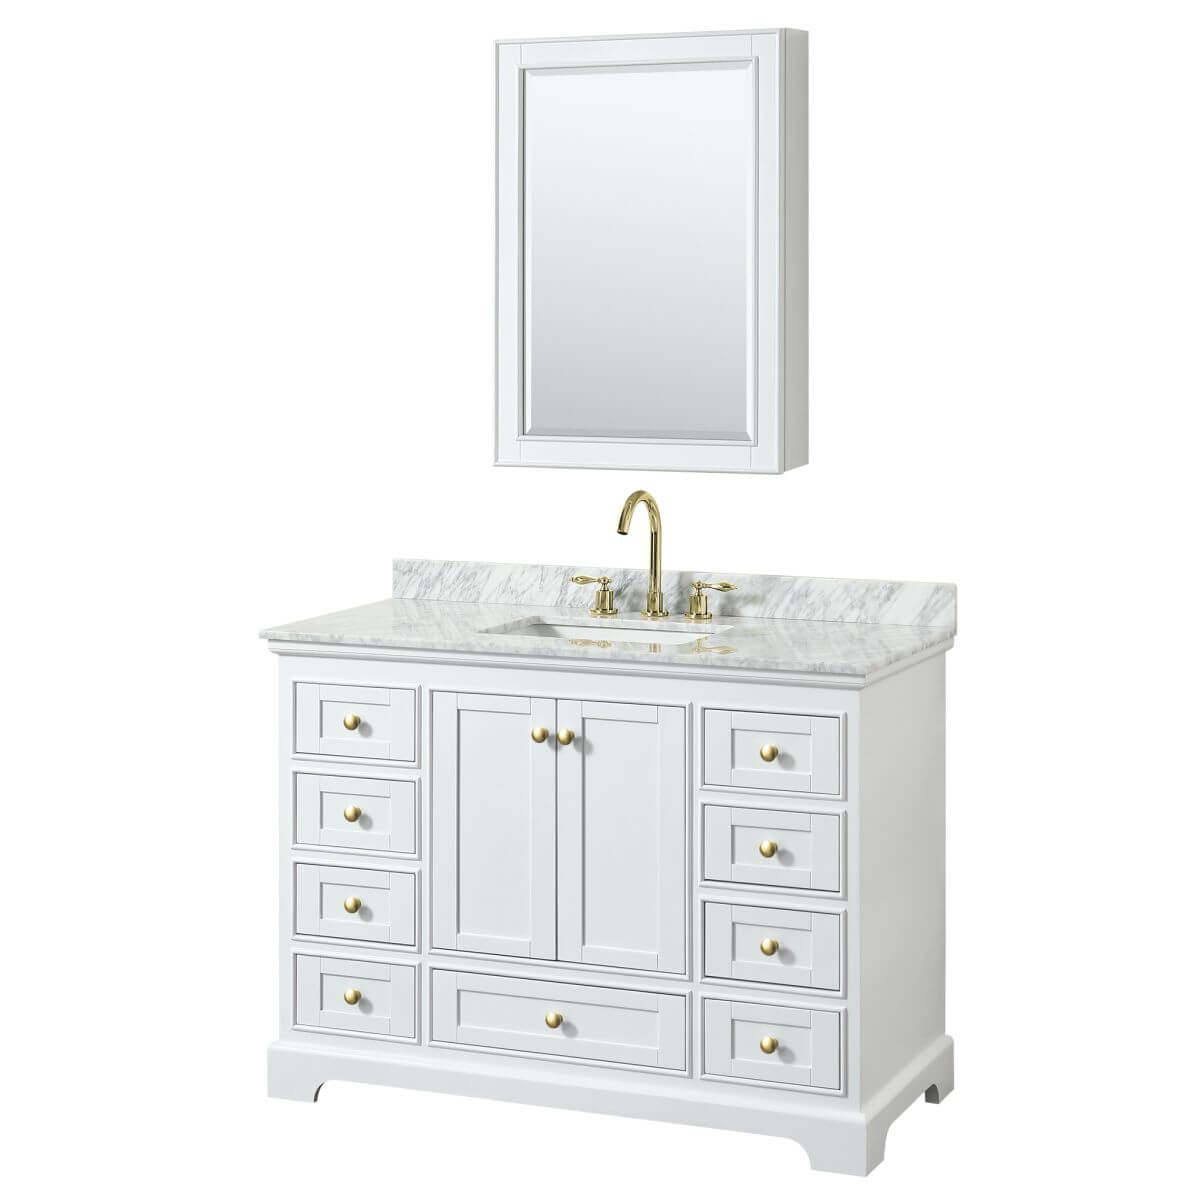 Wyndham Collection Deborah 48 inch Single Bathroom Vanity in White with White Carrara Marble Countertop, Undermount Square Sink, Brushed Gold Trim and Medicine Cabinet - WCS202048SWGCMUNSMED